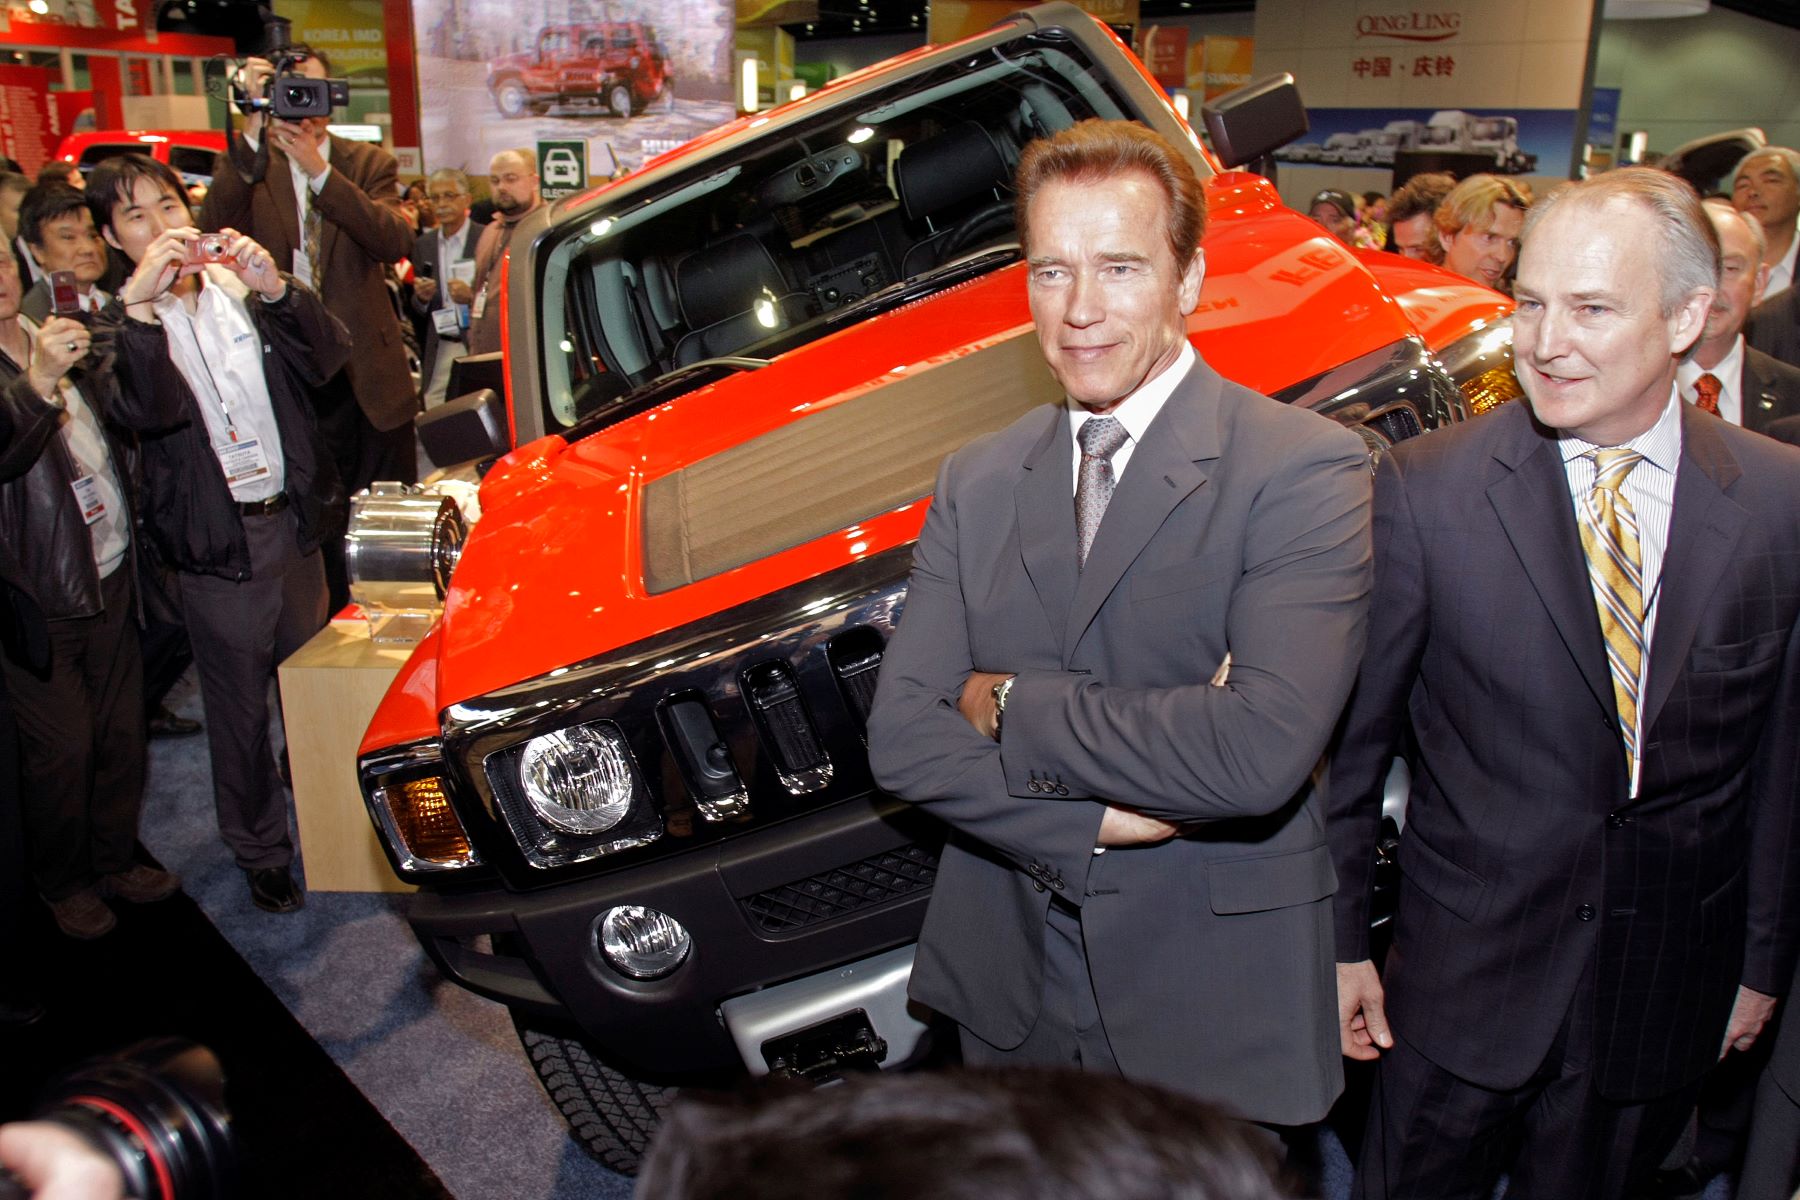 California Governor Arnold Schwarzenegger in front of the new Hummer H3 at the Society of Automotive Engineers World Congress in Detroit, Michigan, in 2009